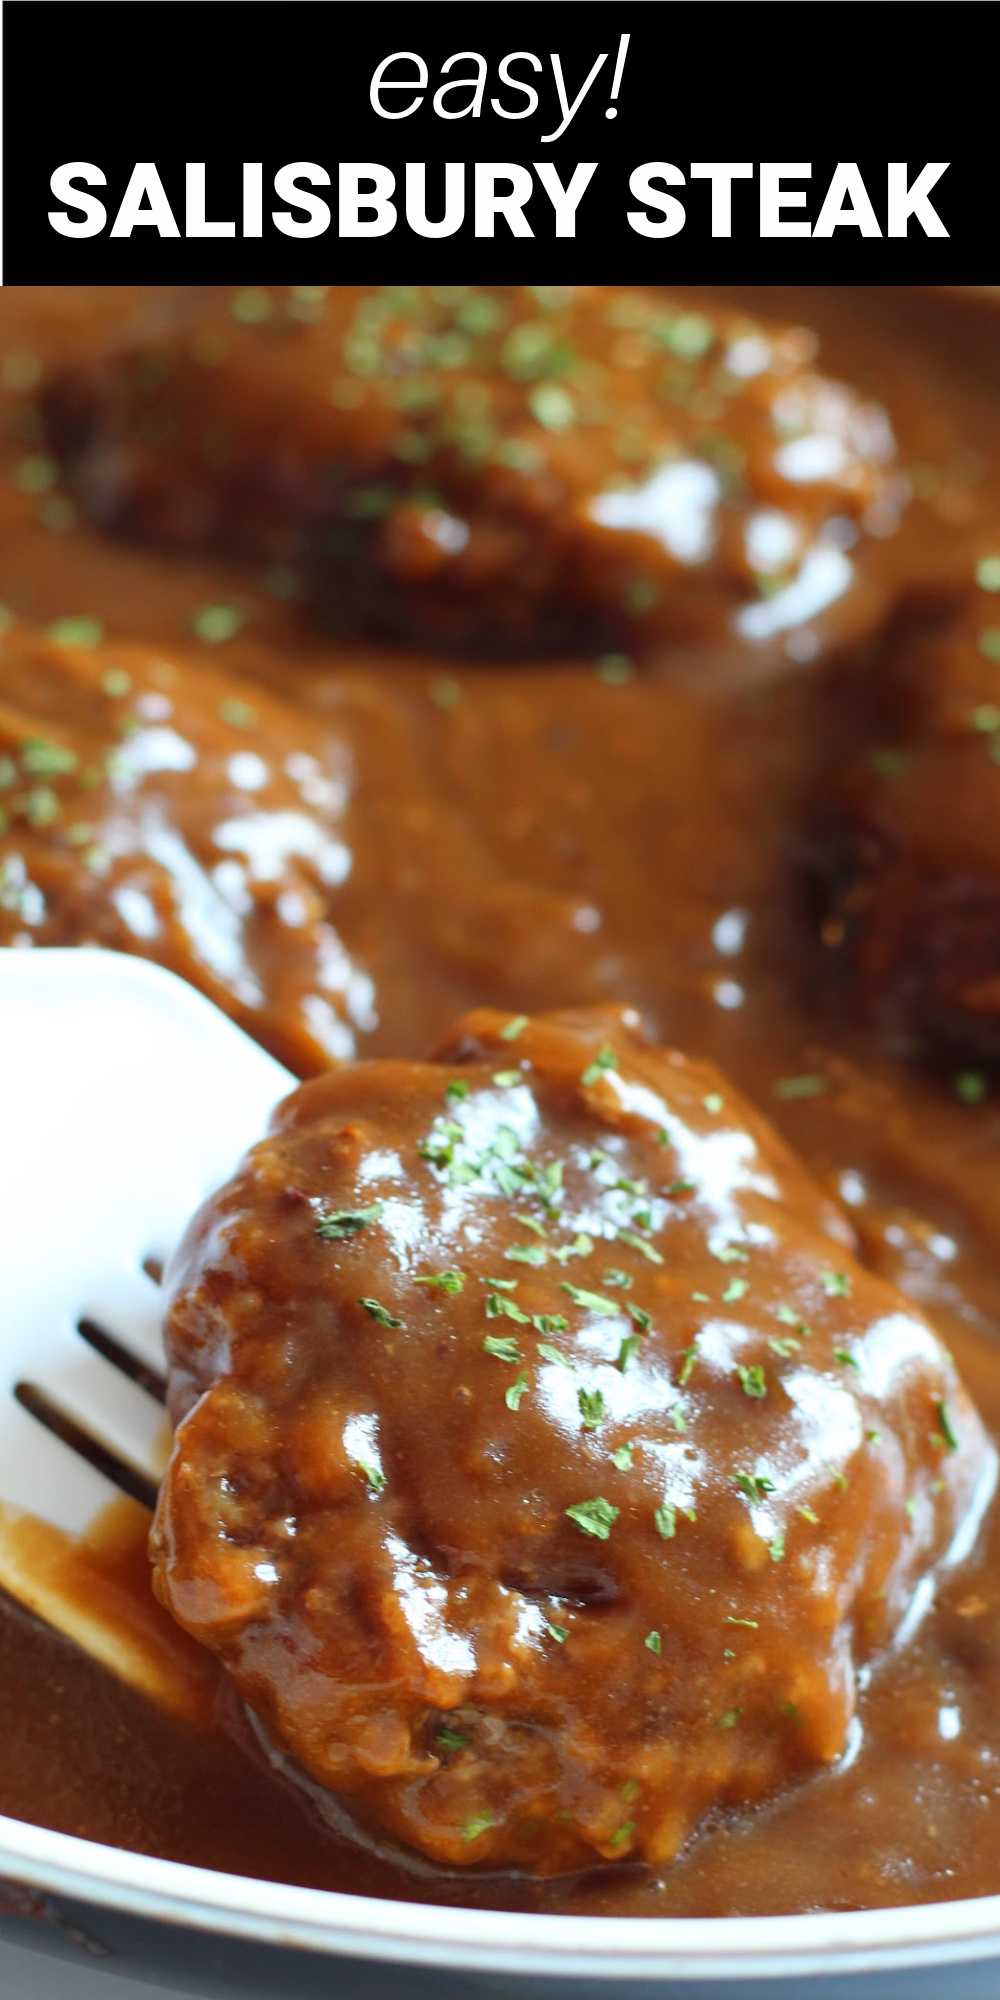 This easy Salisbury Steak recipe is classic comfort food like your mom used to make. It's perfectly seasoned beef patties served with a rich brown gravy.